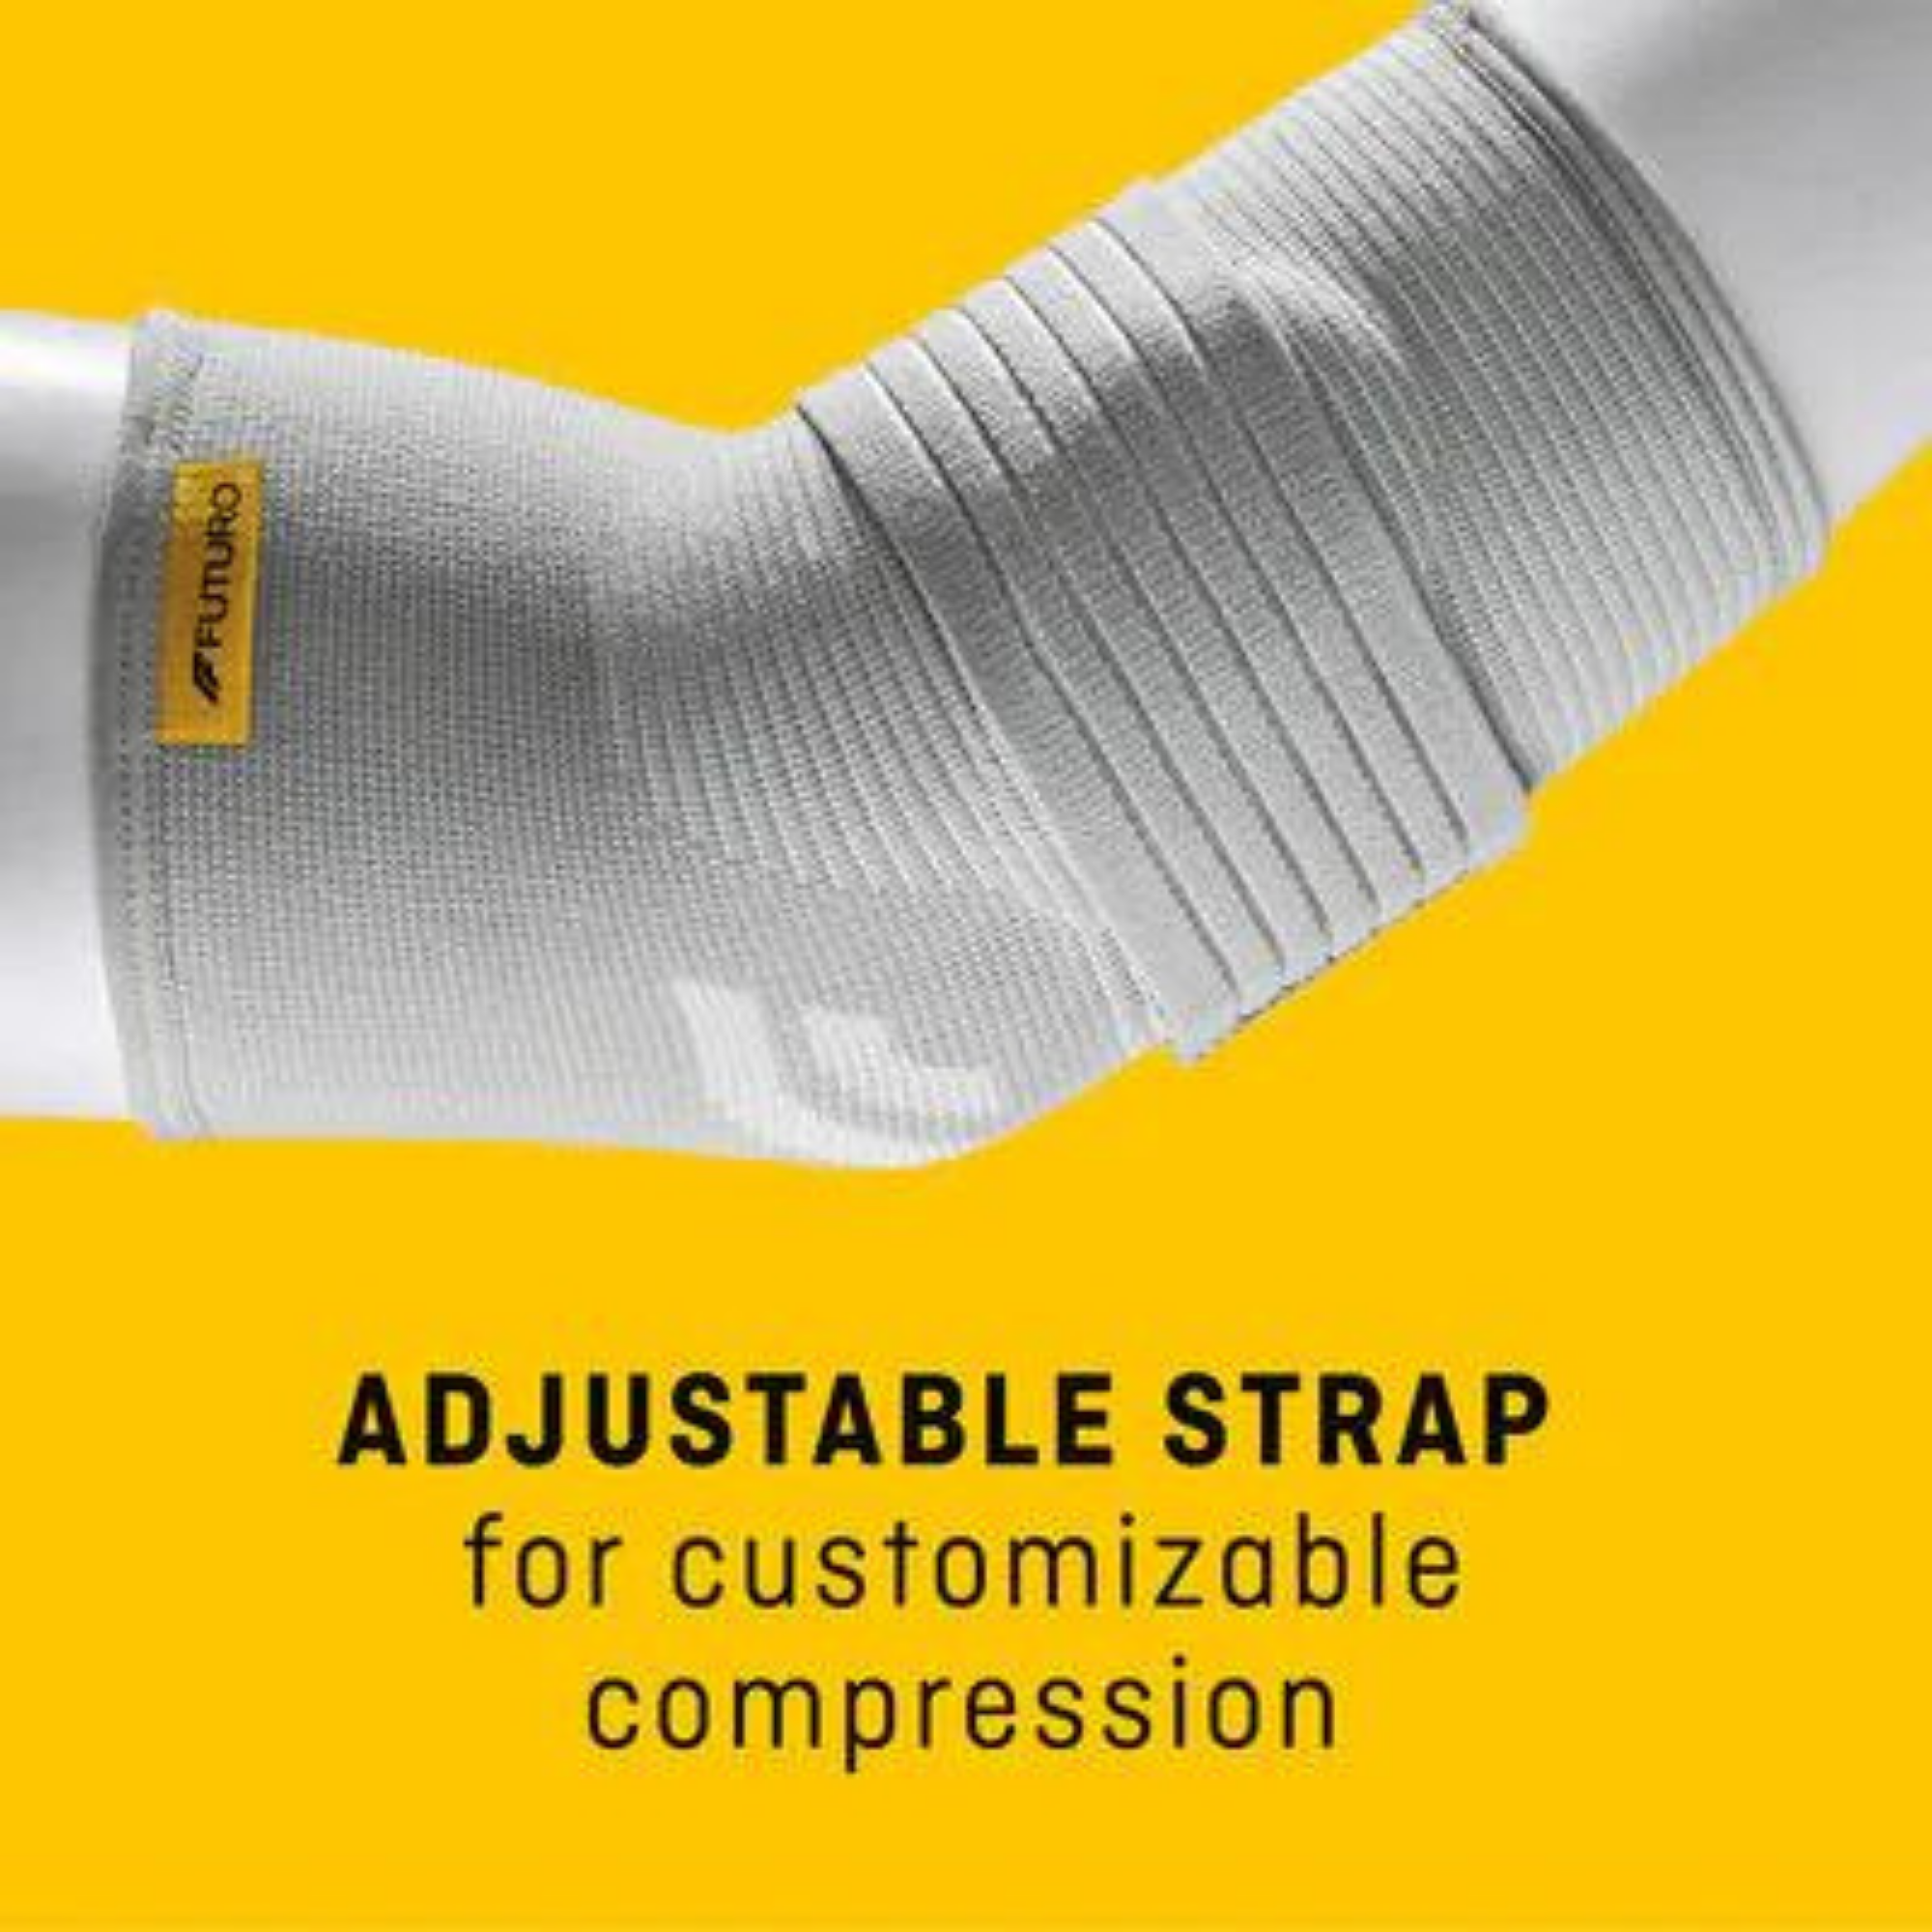 Futuro Comfort Elbow Support with Pressure Pads 47861ENR Small